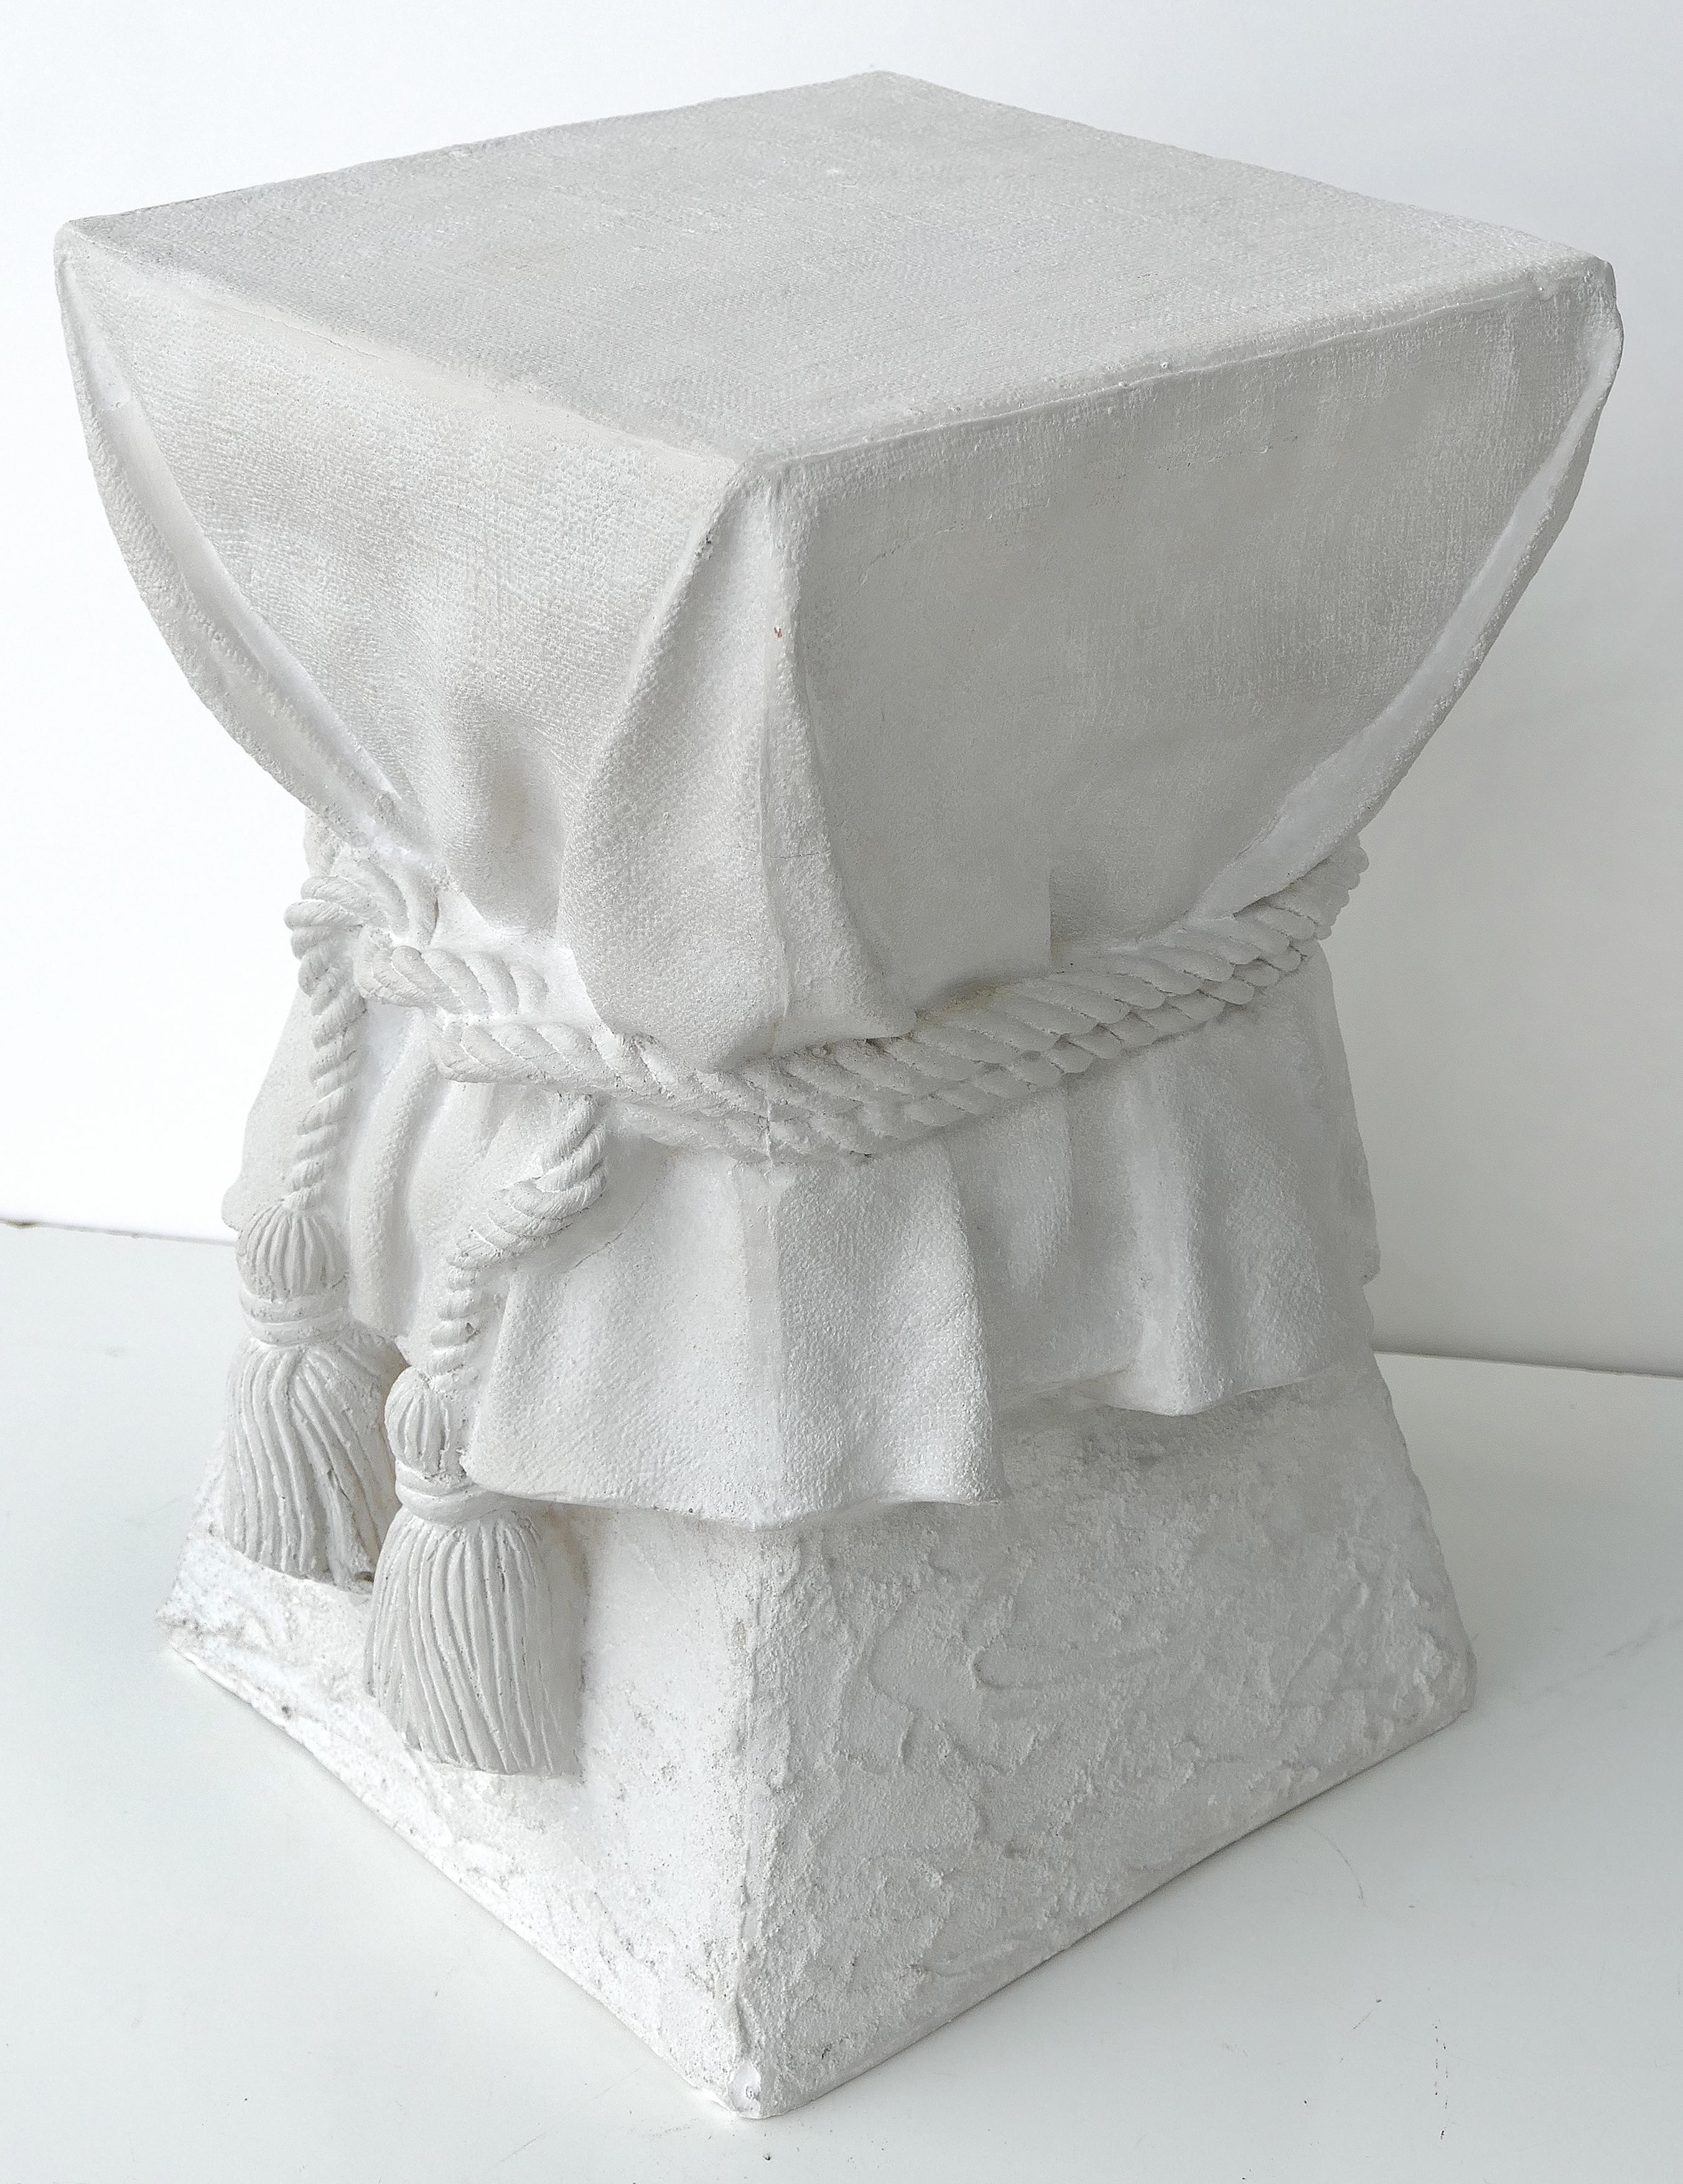 John Dickinson draped rope and tassels side table

Offered for sale is a vintage John Dickinson plaster 